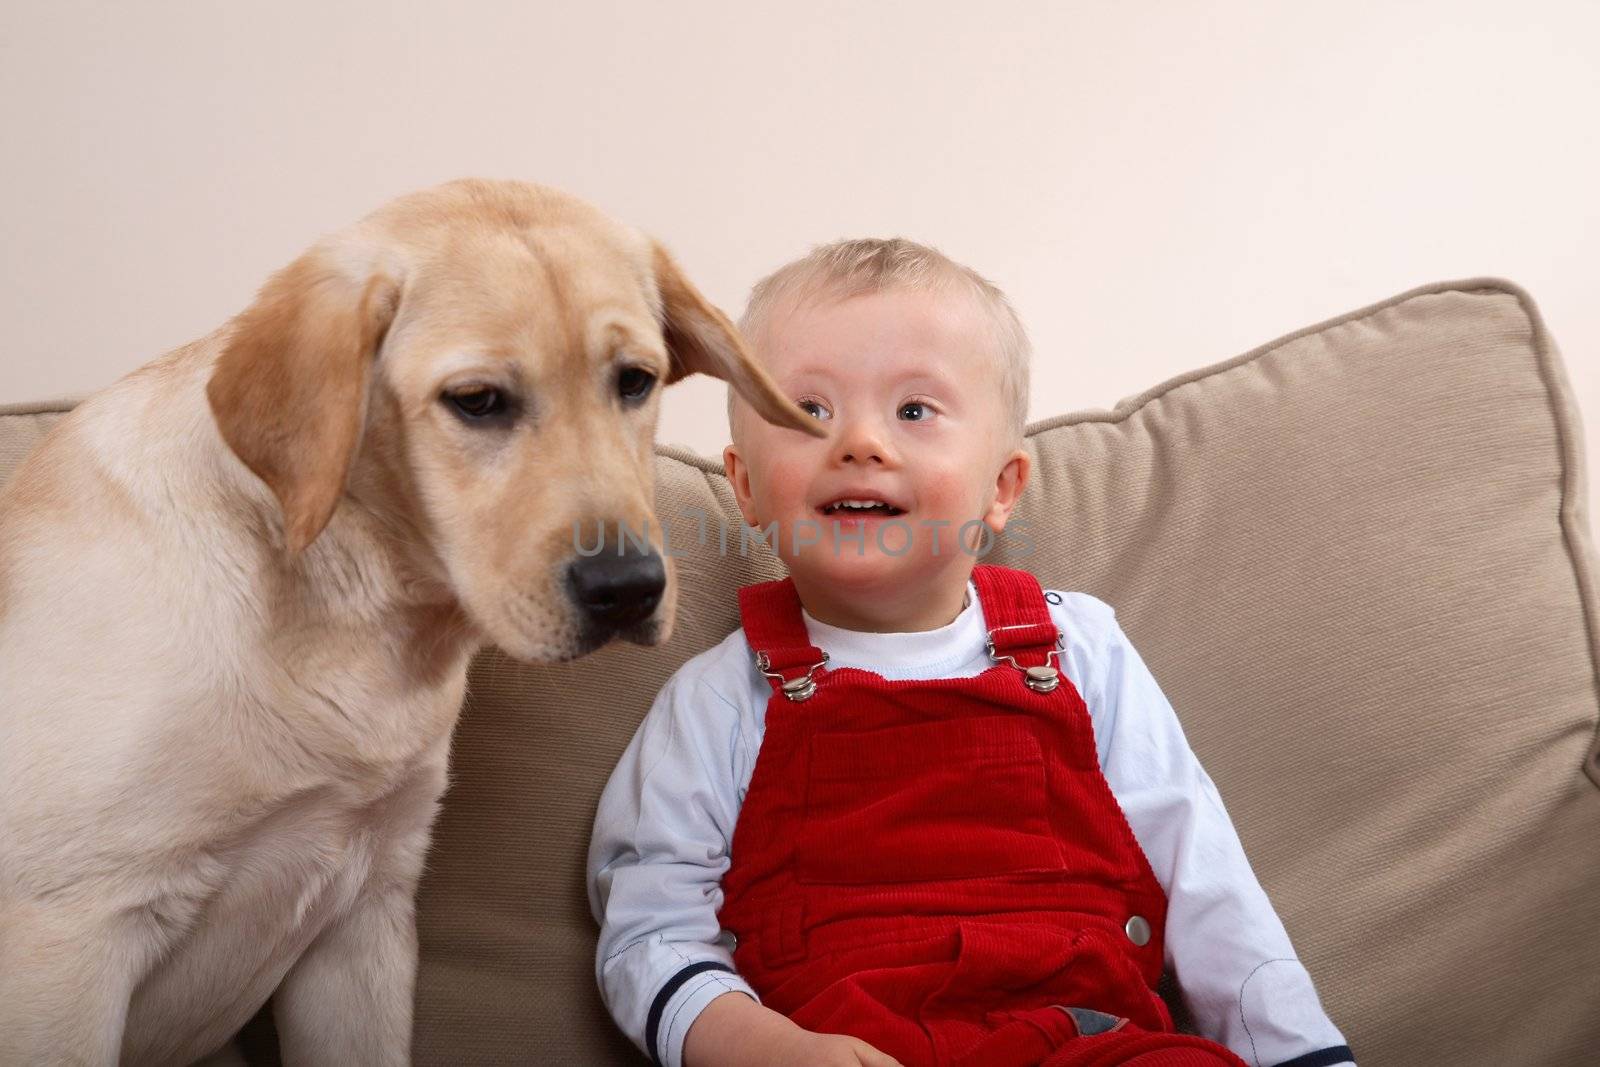 Dog therapy for boy with Down Syndrome.